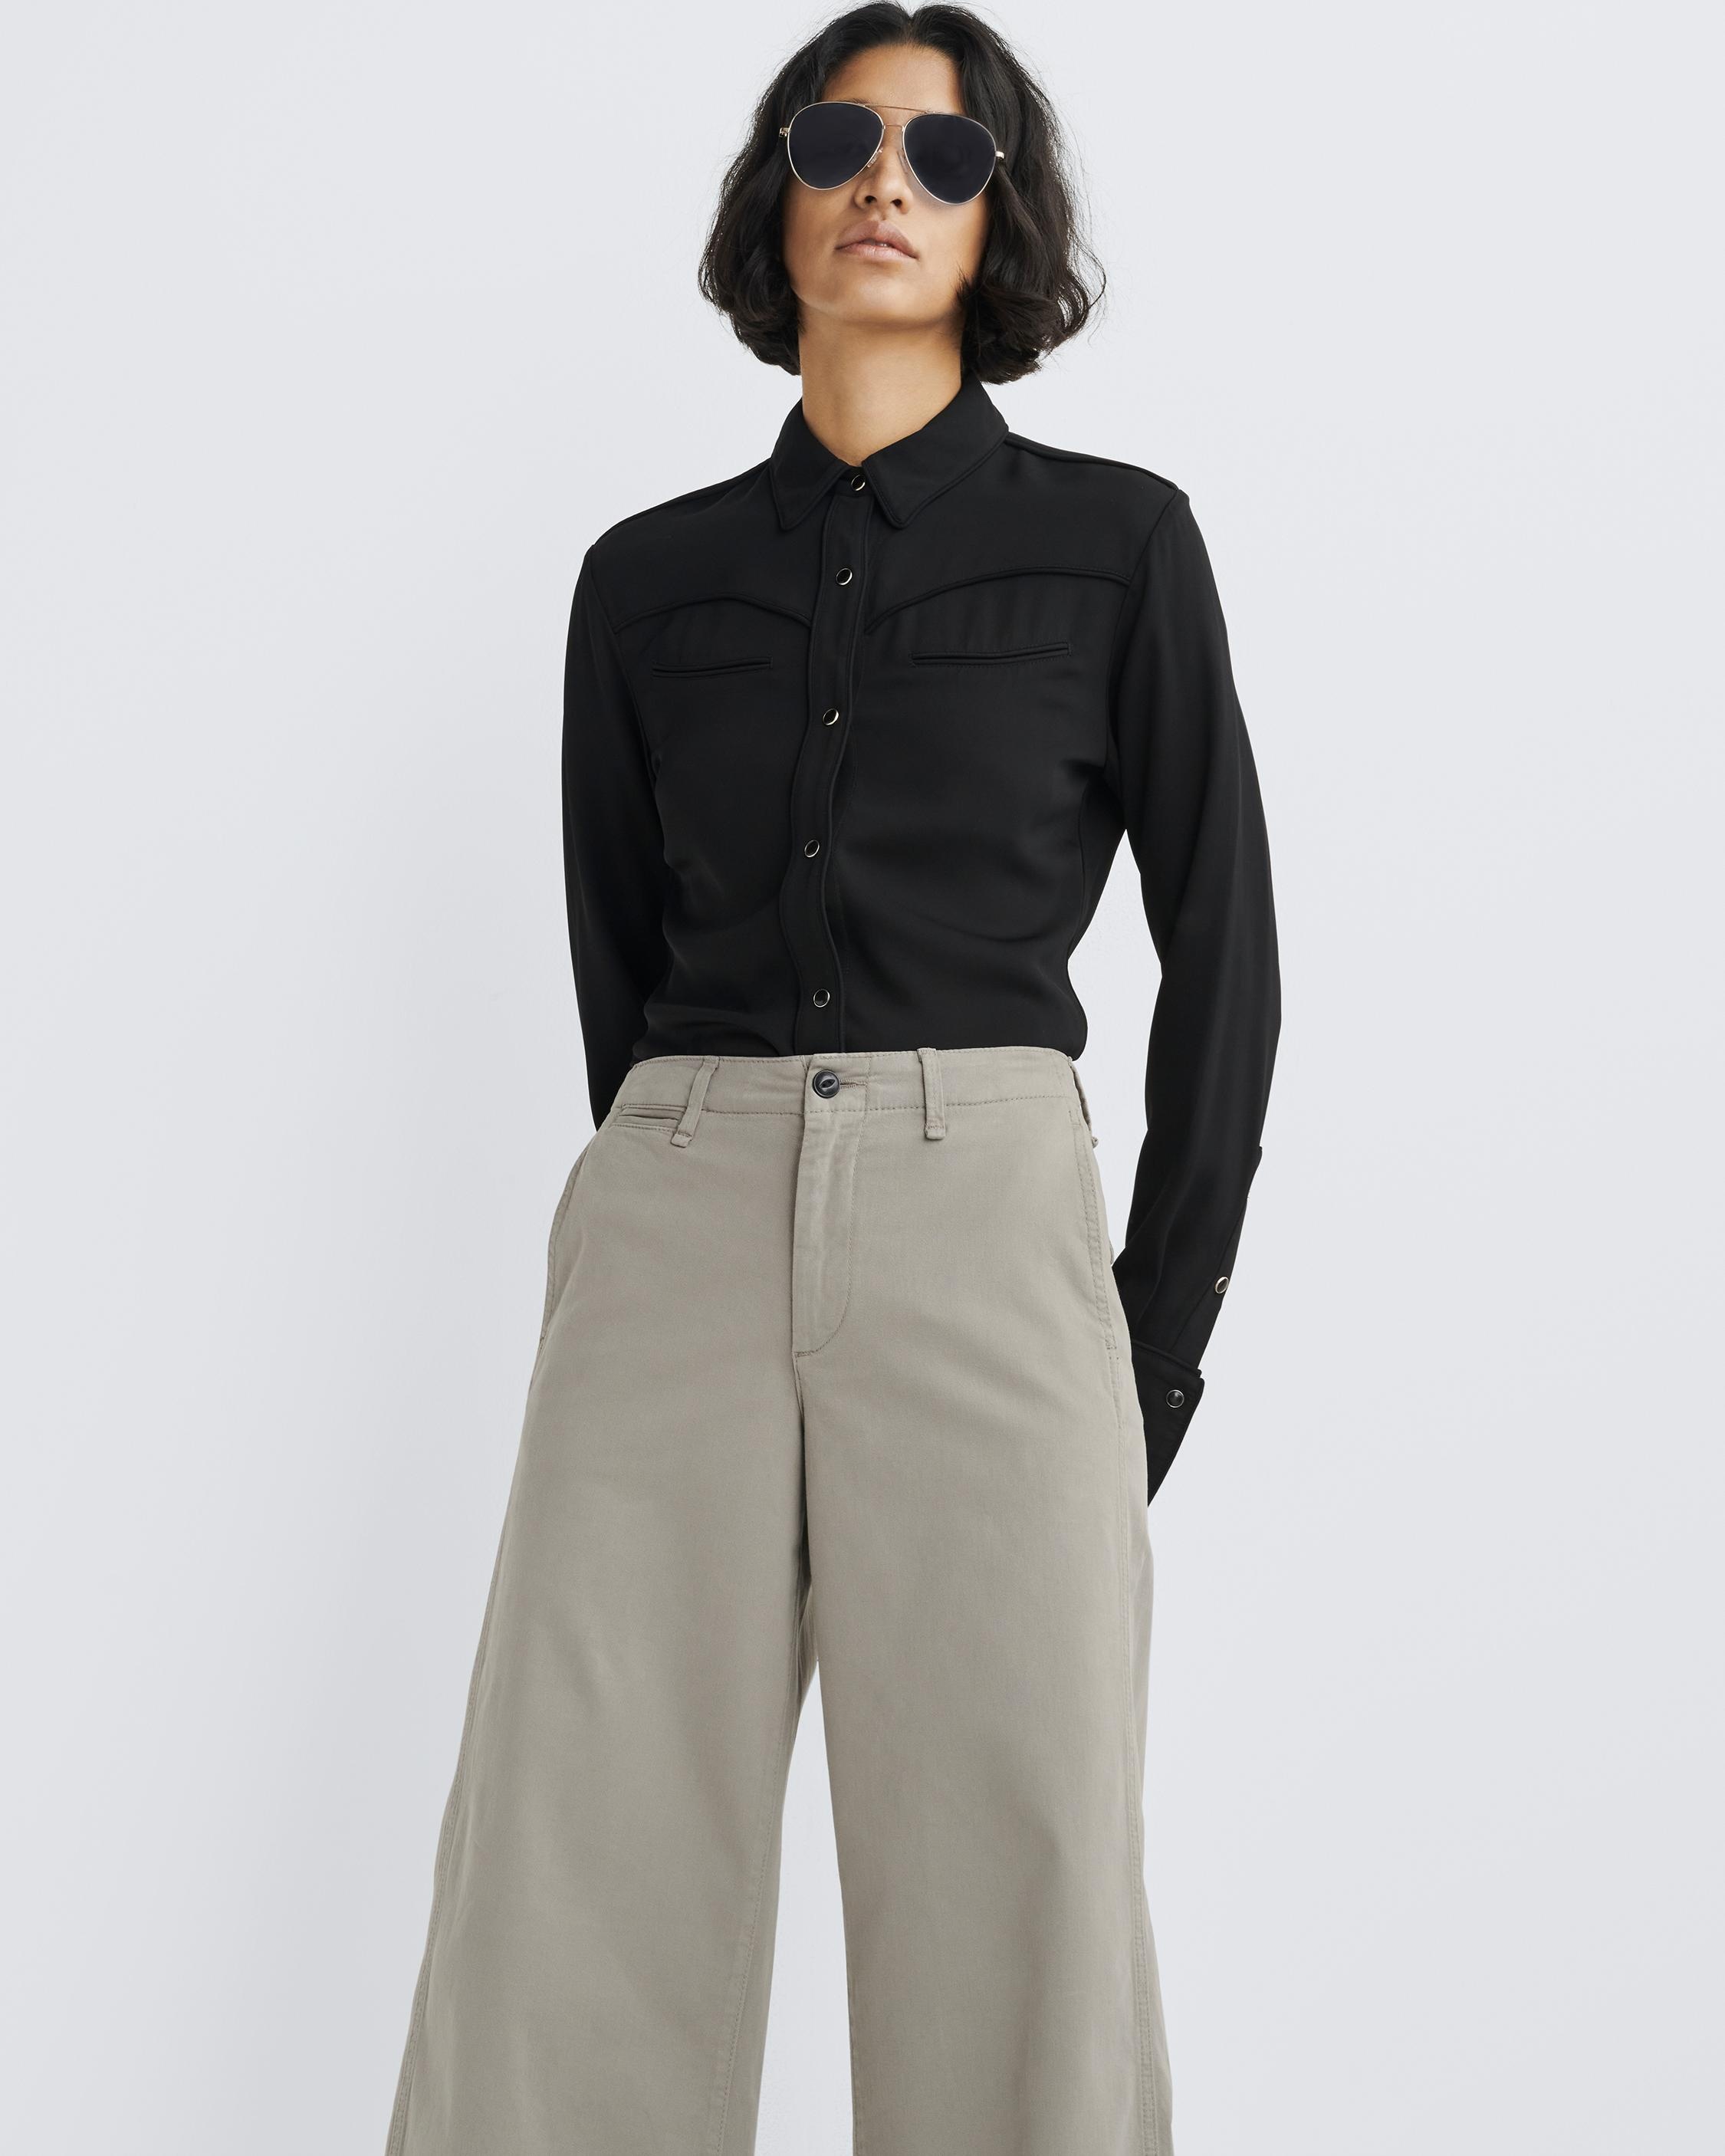 Sofie Cotton Chino
Wide-Leg Fit - 6